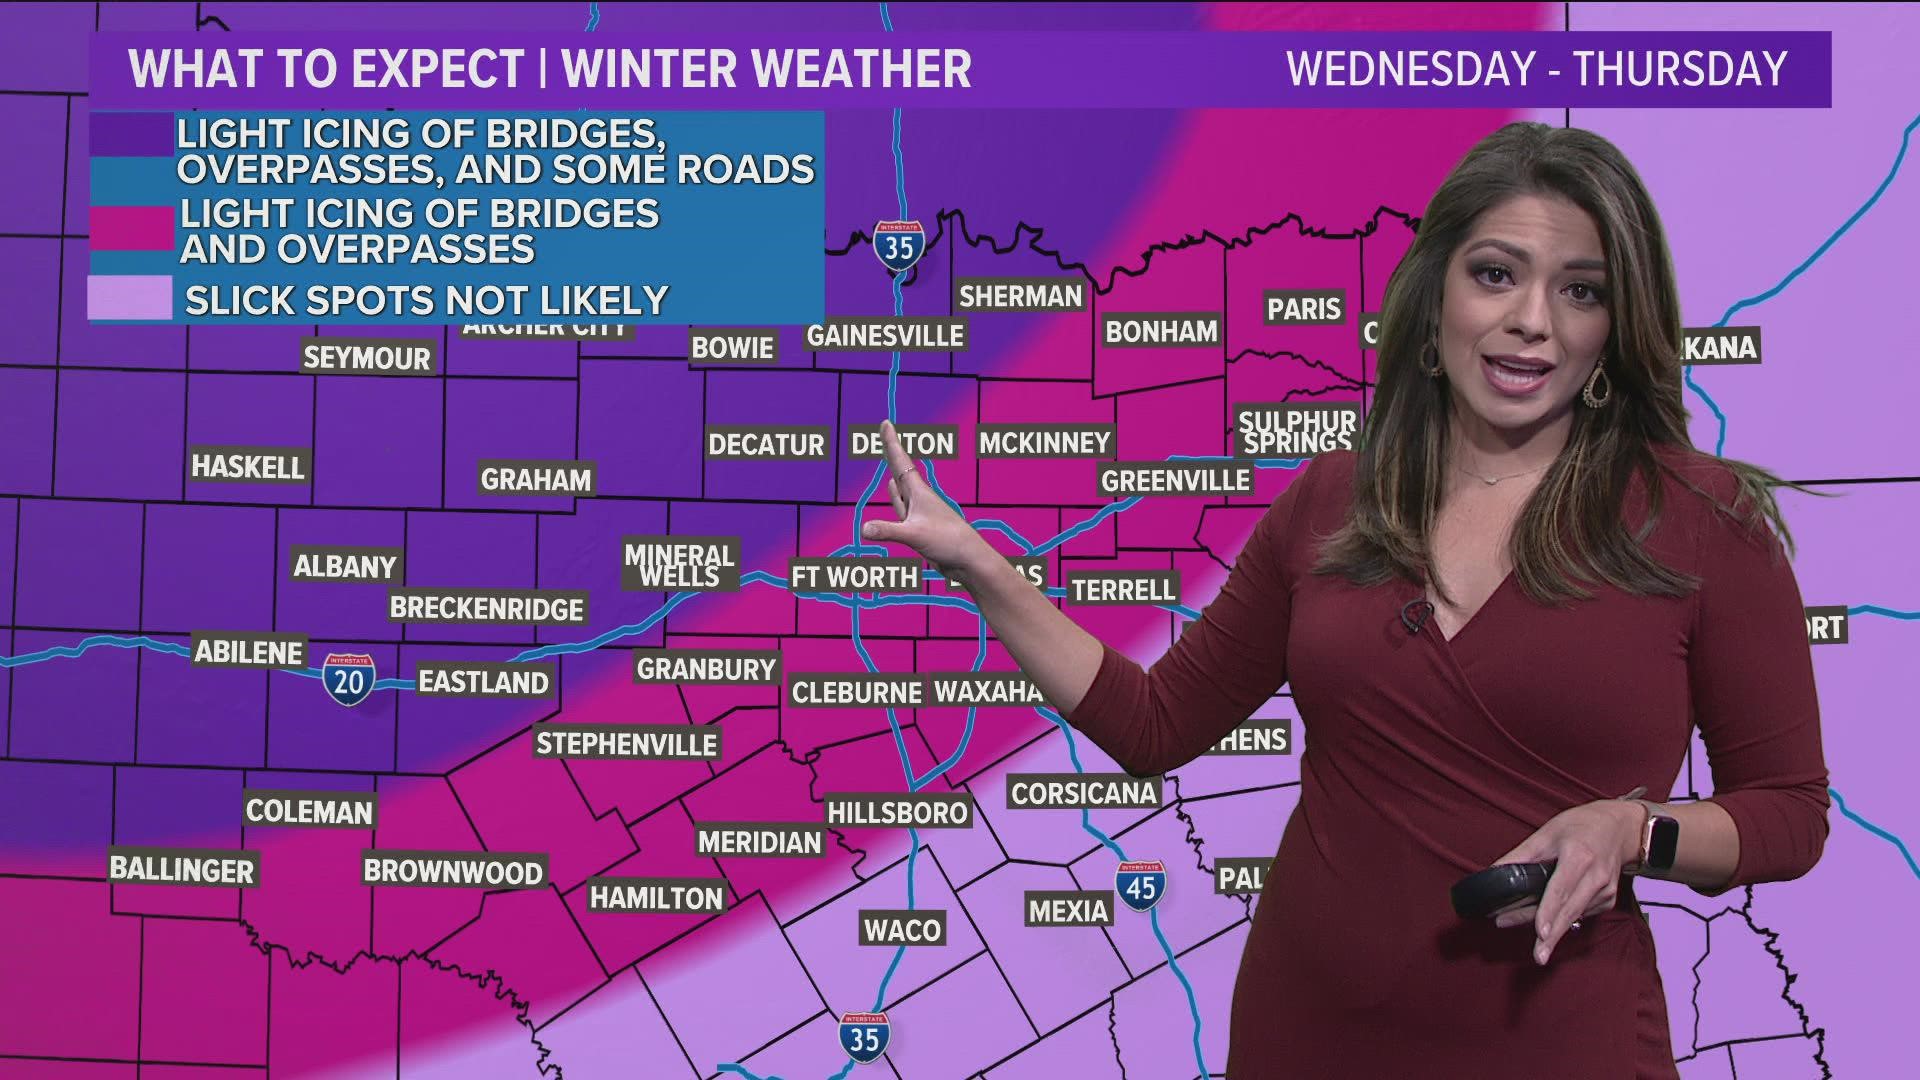 DFW weather Fire danger, possible severe storms and a chance of wintry